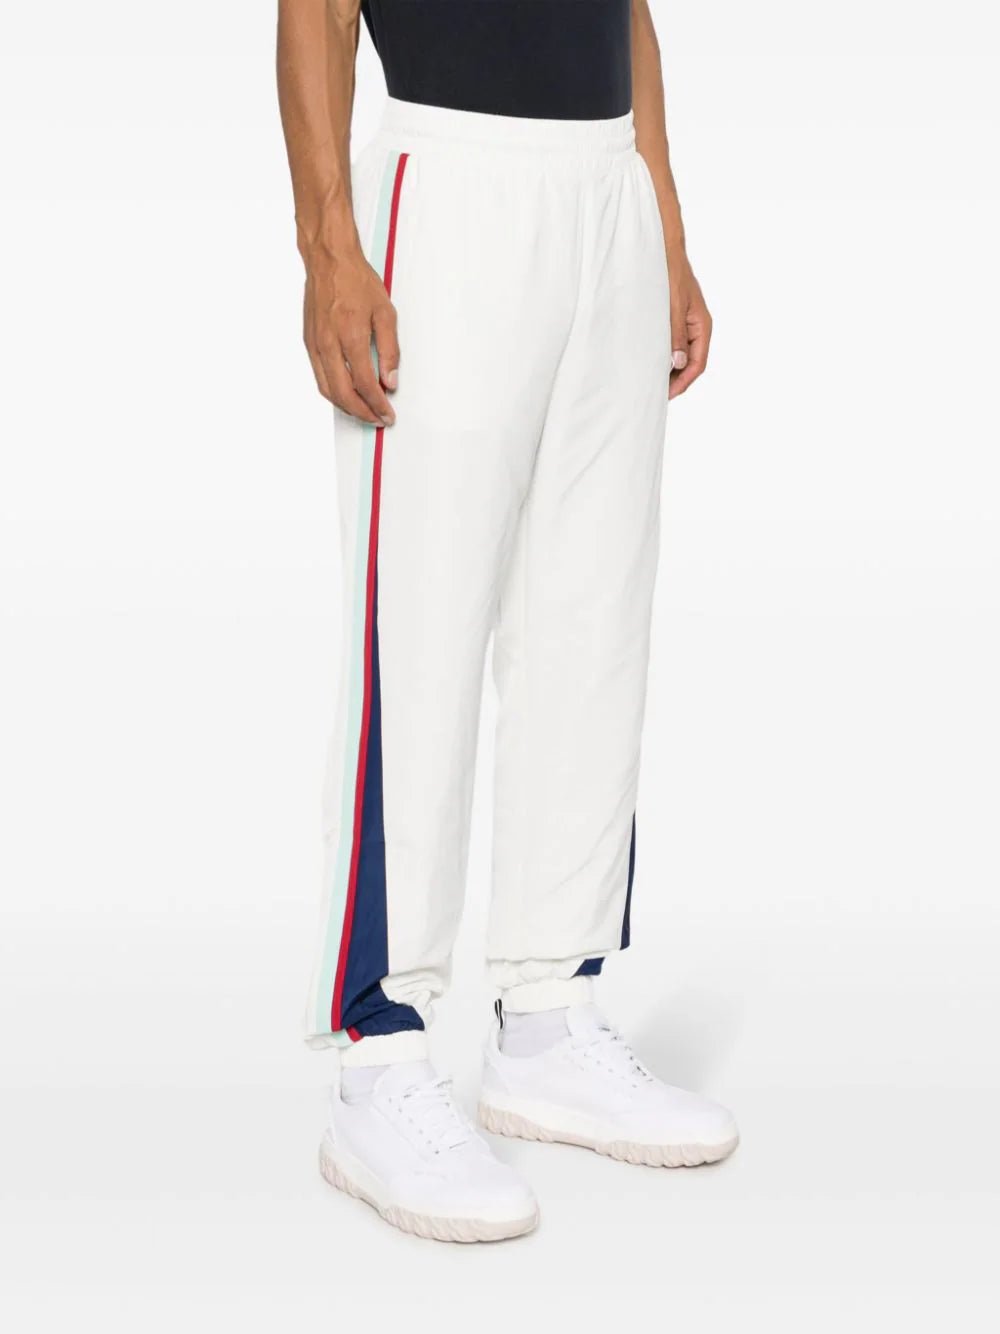 CasablancaLogo-Patch Track Pants at Fashion Clinic